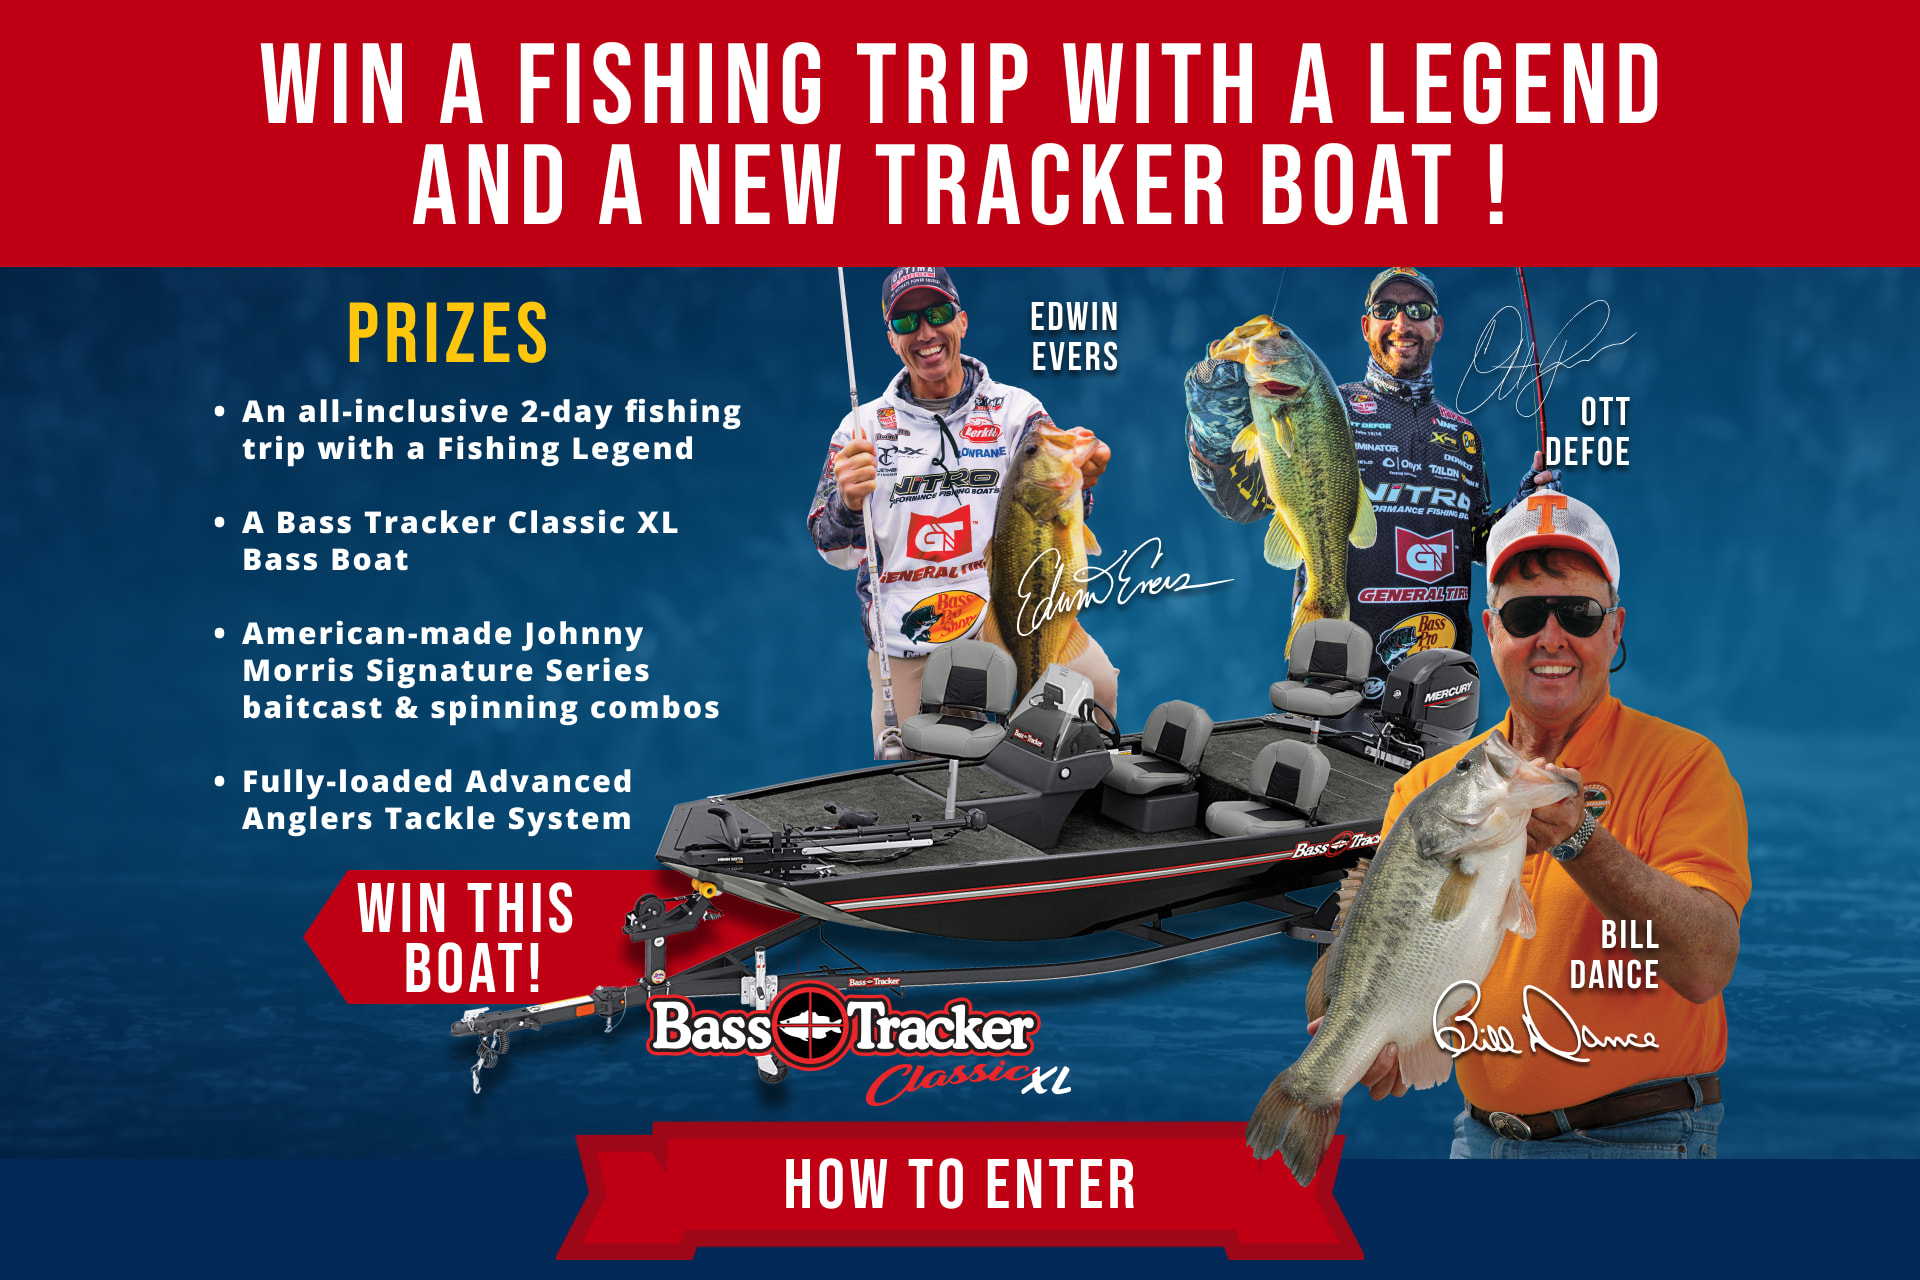 Spring Fishing Classic Giveaway -
            An all-inclusive 2-day fishing trip with a Fishing Legend

           A Bass Tracker Classic XL Bass Boat

           American-made Johnny Morris Signature Series baitcast & spinning combos

           Fully-loaded Advanced Anglers Tackle System